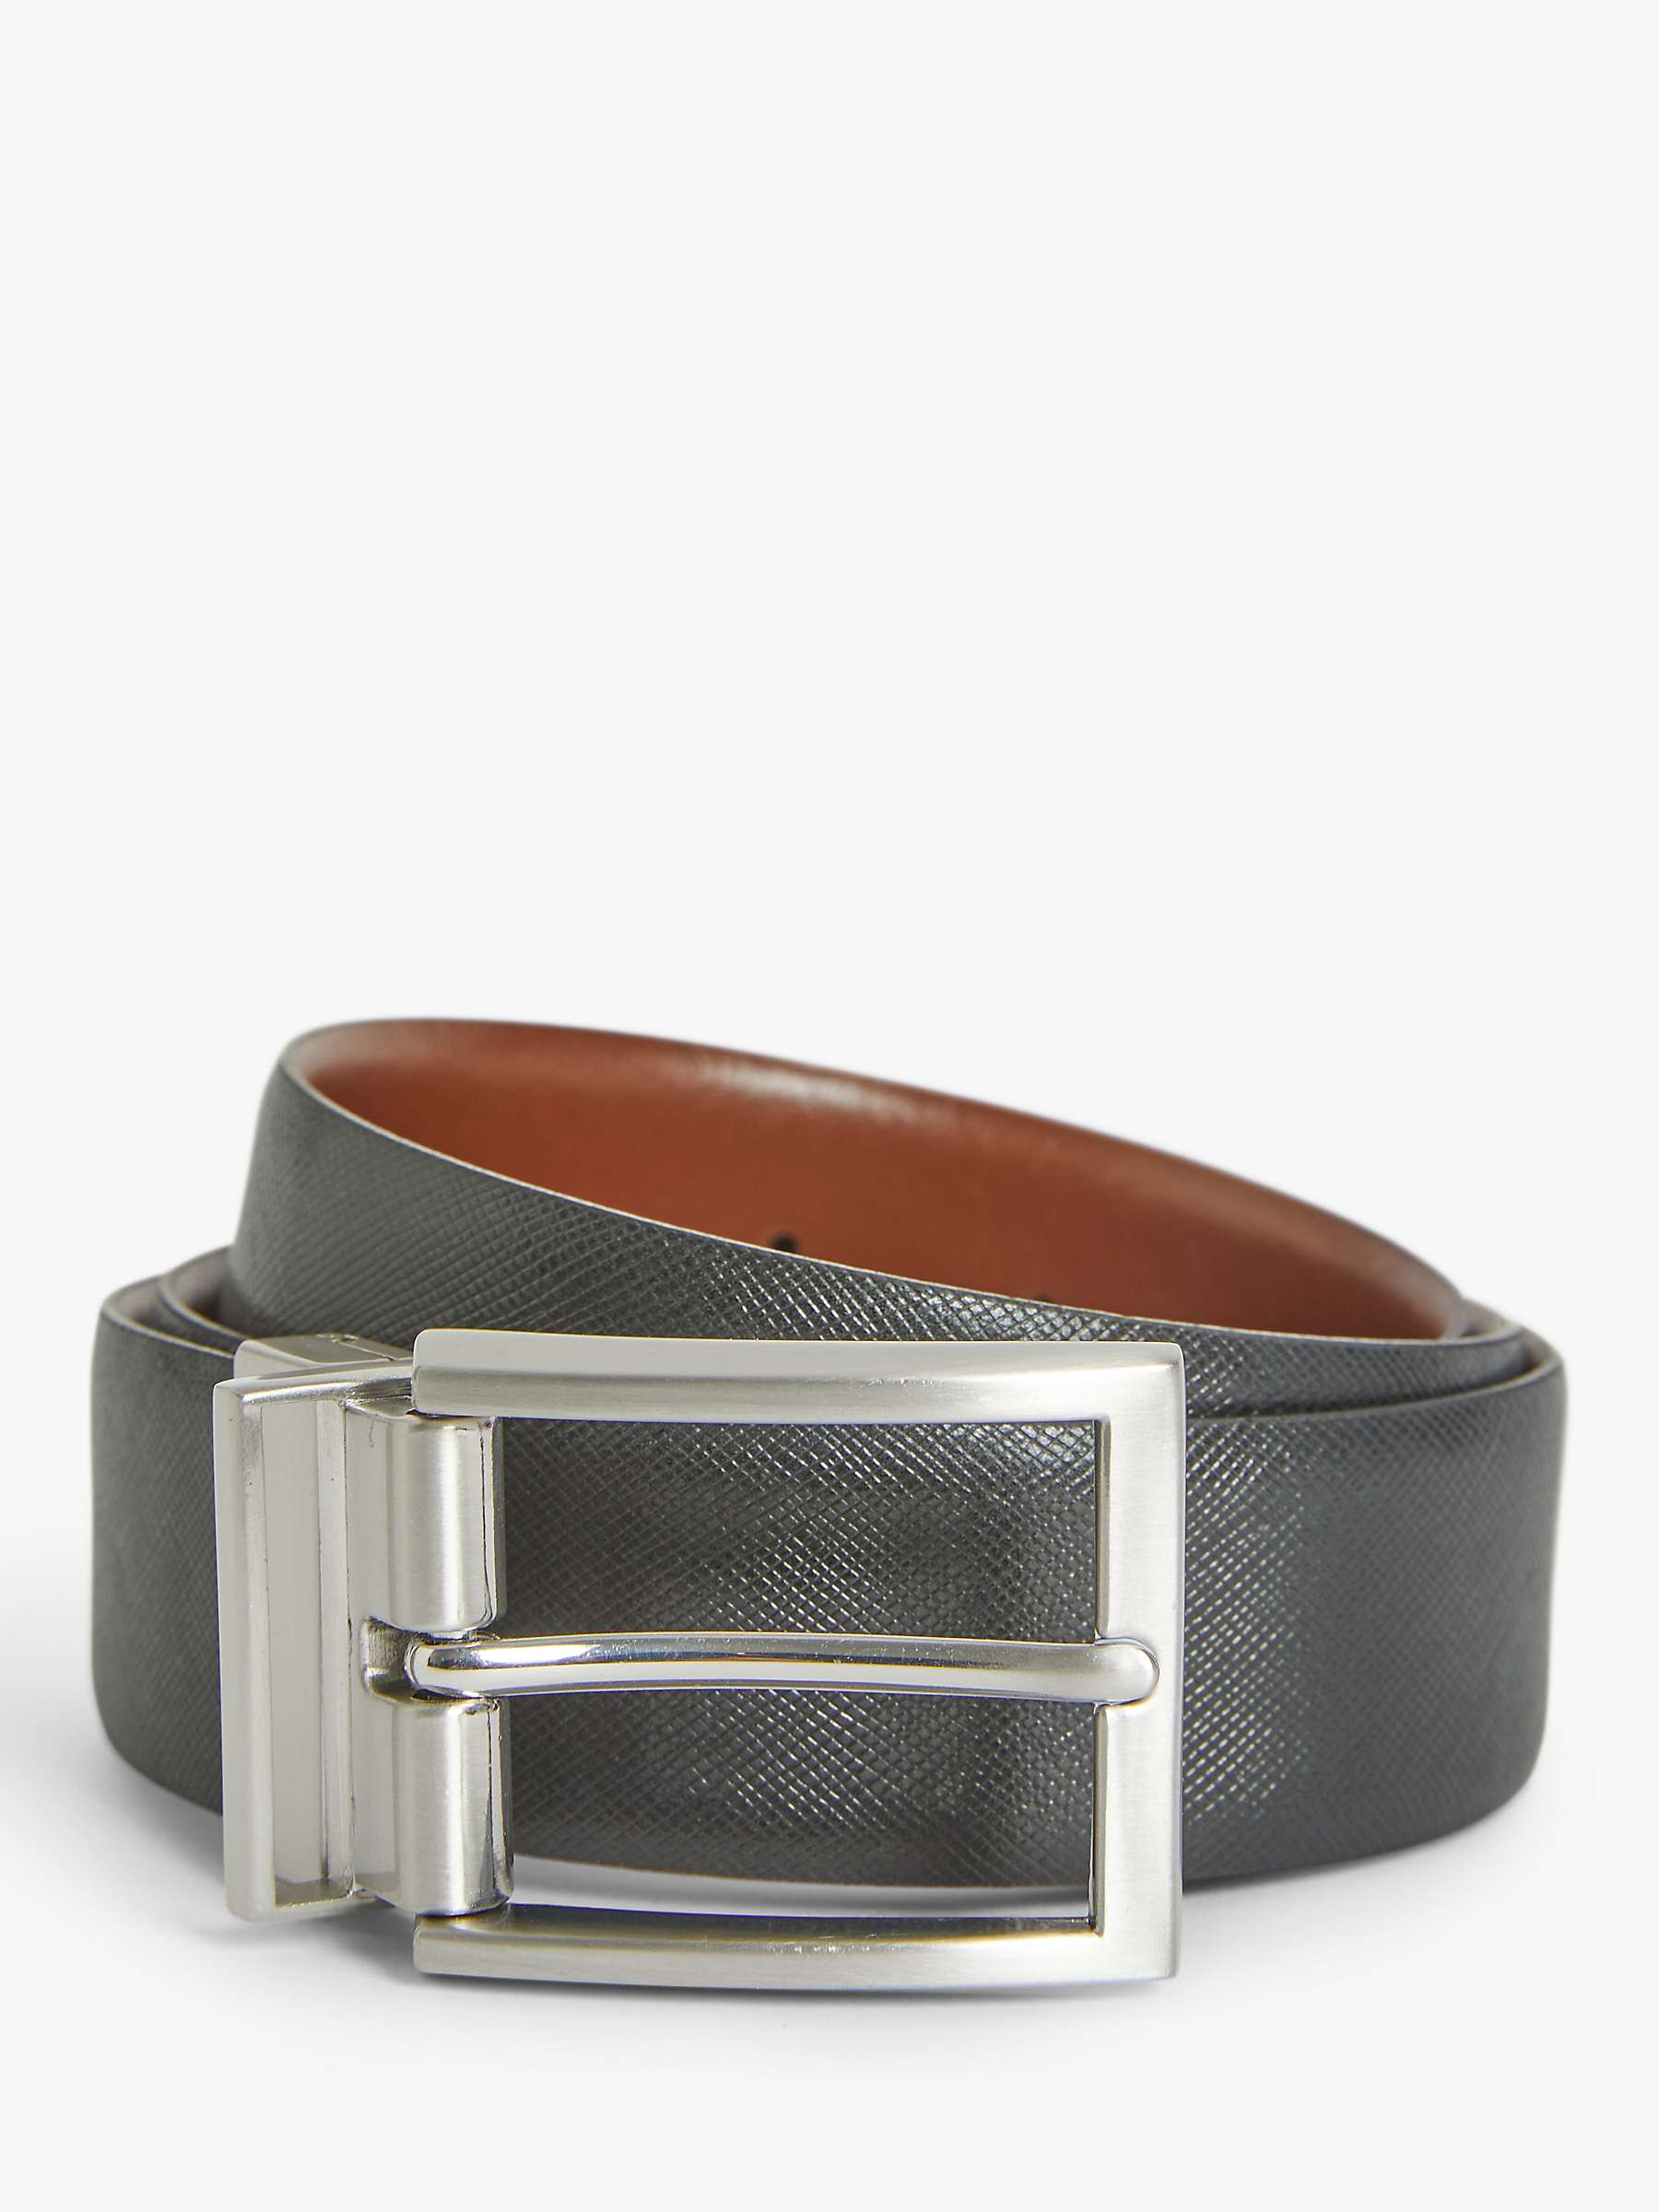 Buy John Lewis Made in Italy Reversible Leather Jeans Belt Online at johnlewis.com